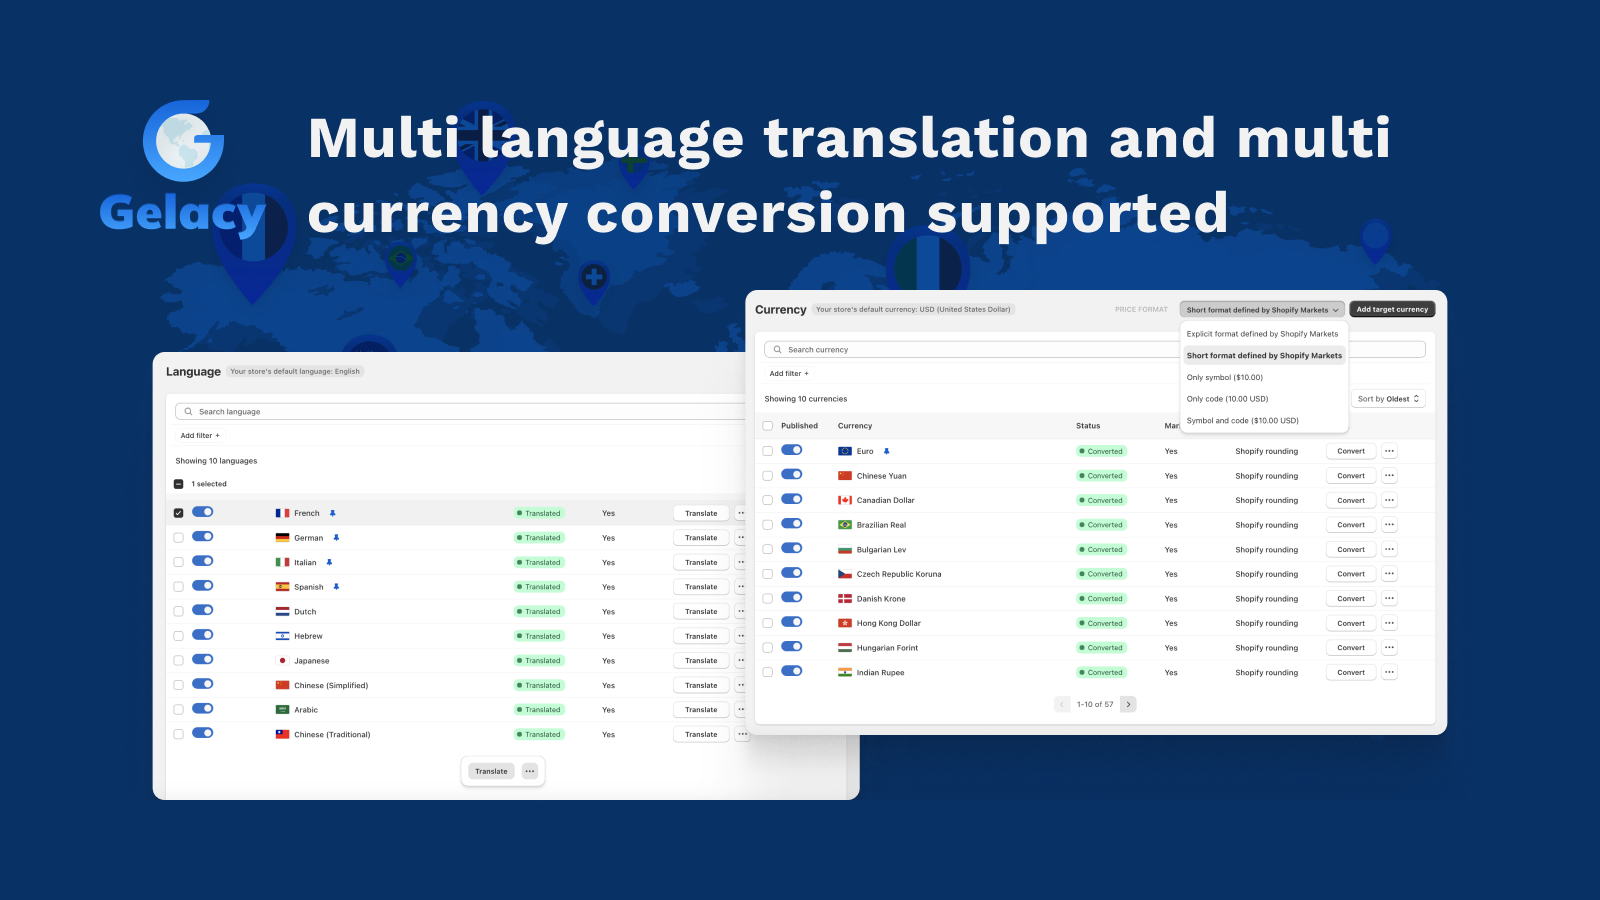 Multi language translation and multi currency conversion support